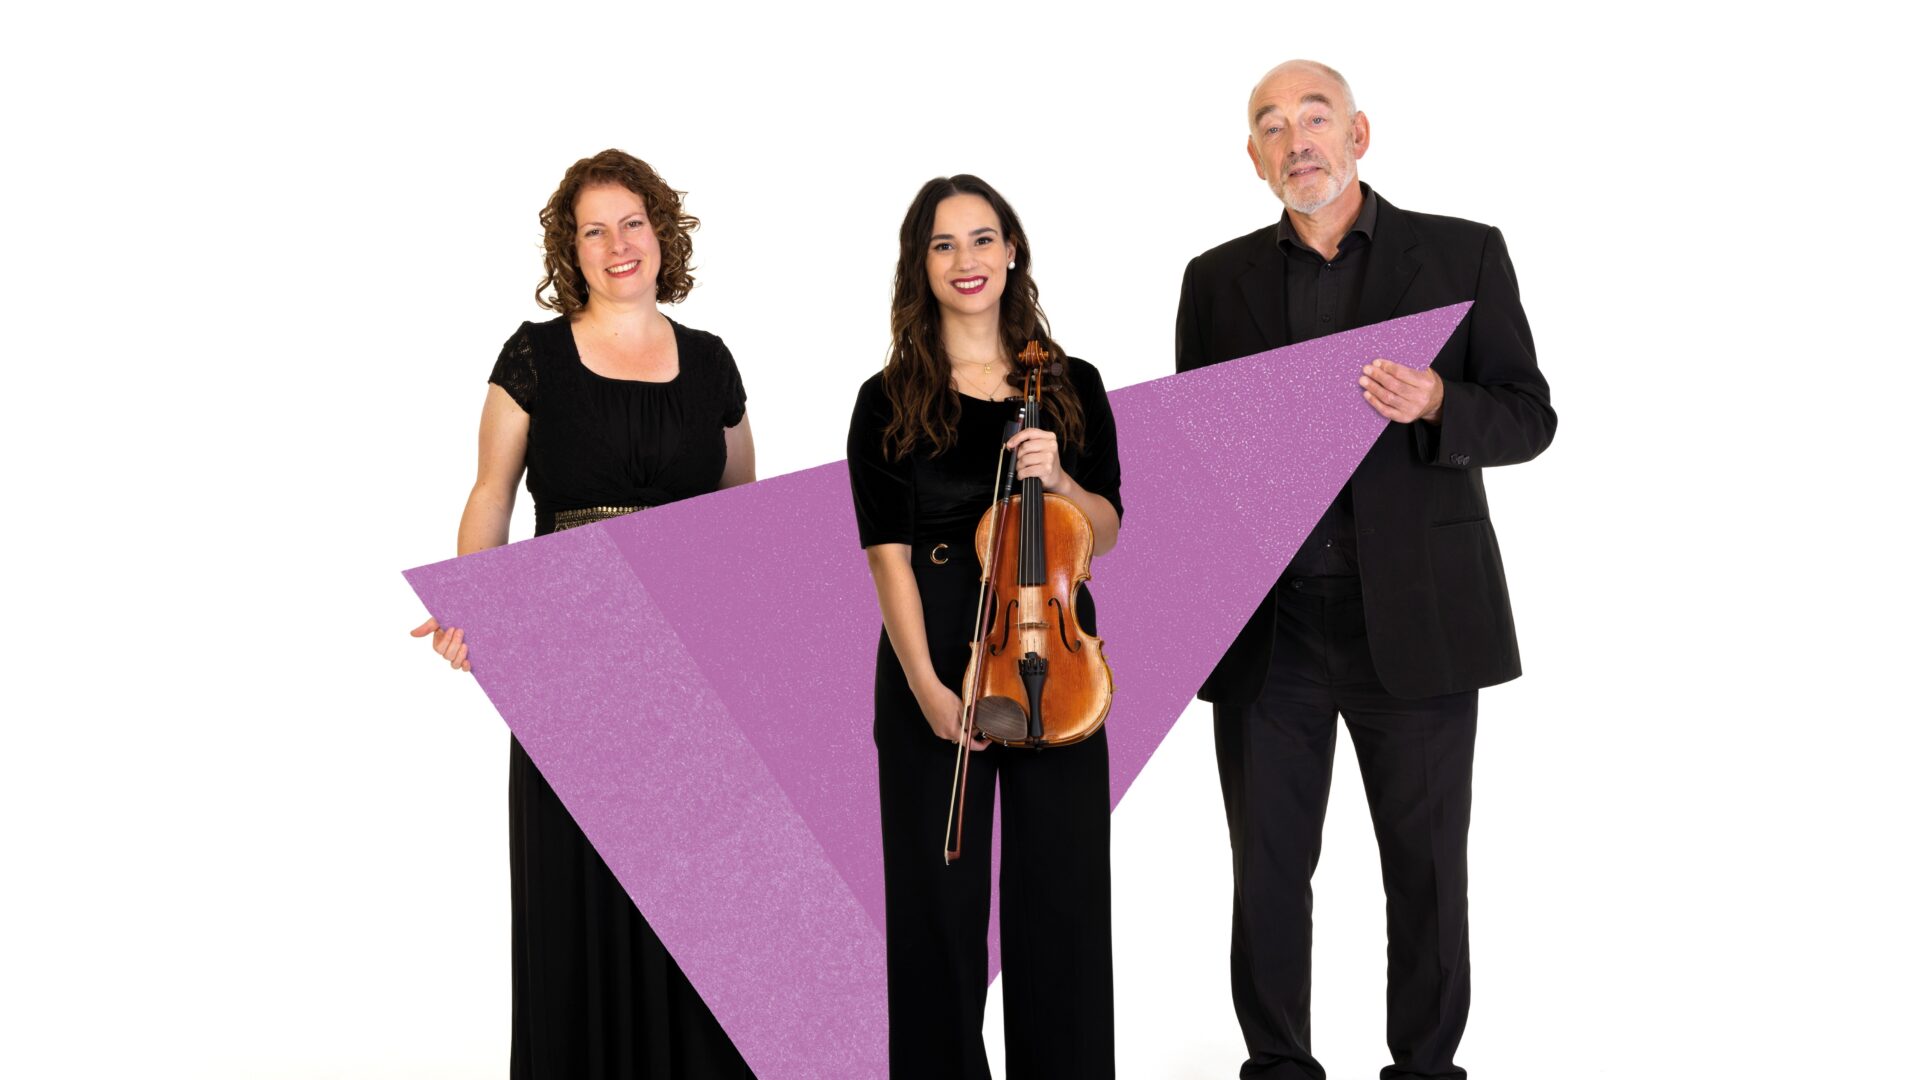 Three BSO musicians, one holding a Viola